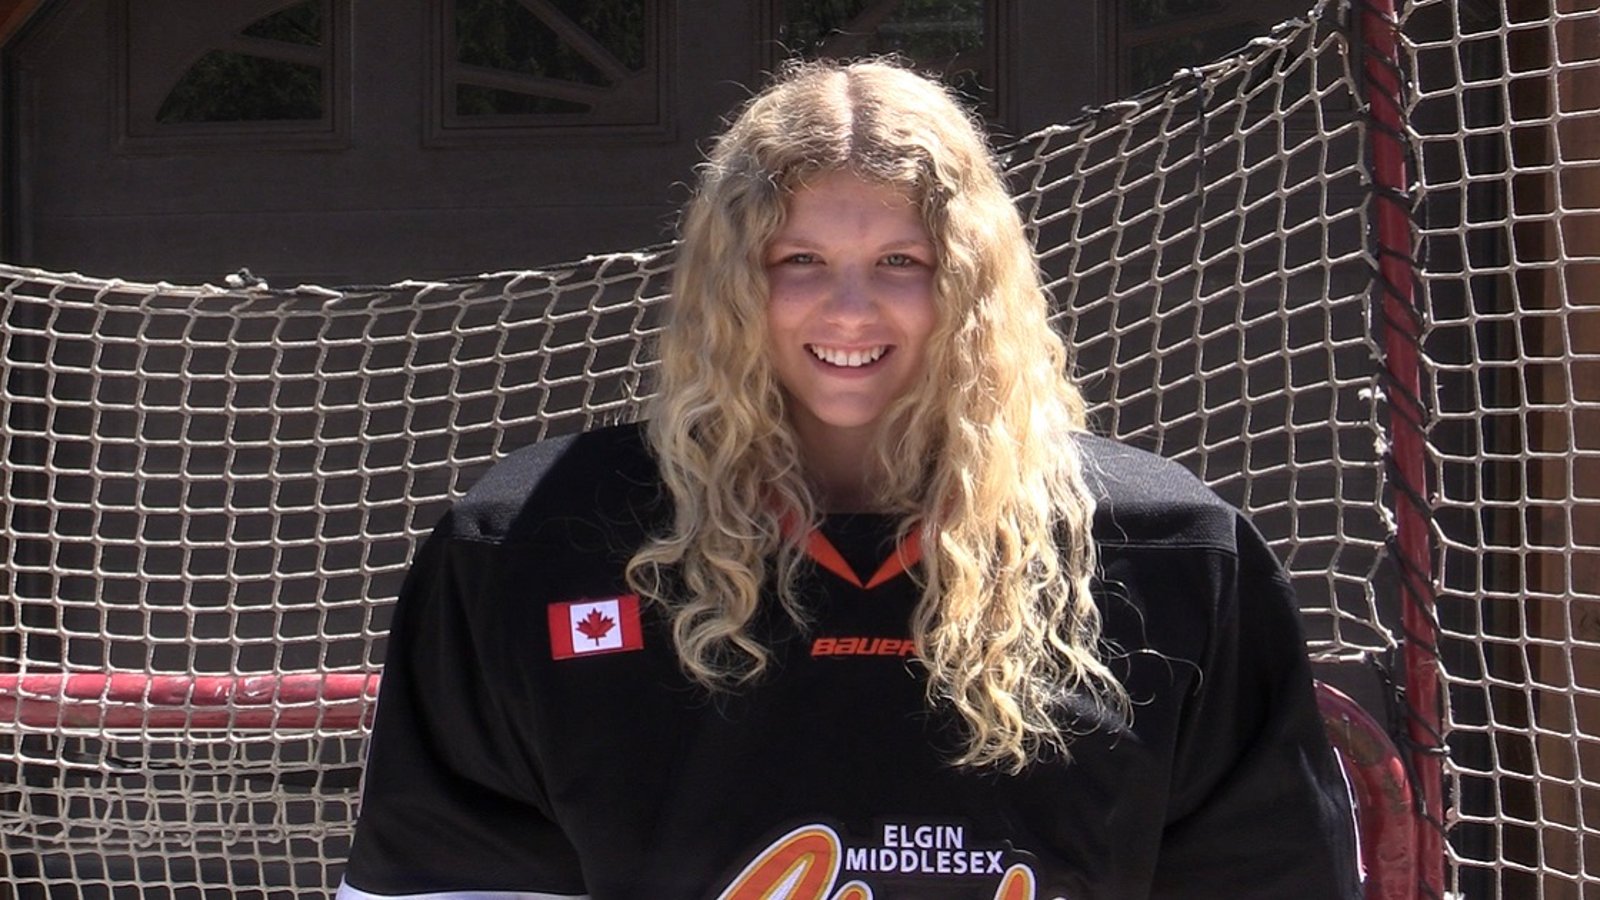 Taya Currie becomes the first woman drafted into the OHL.